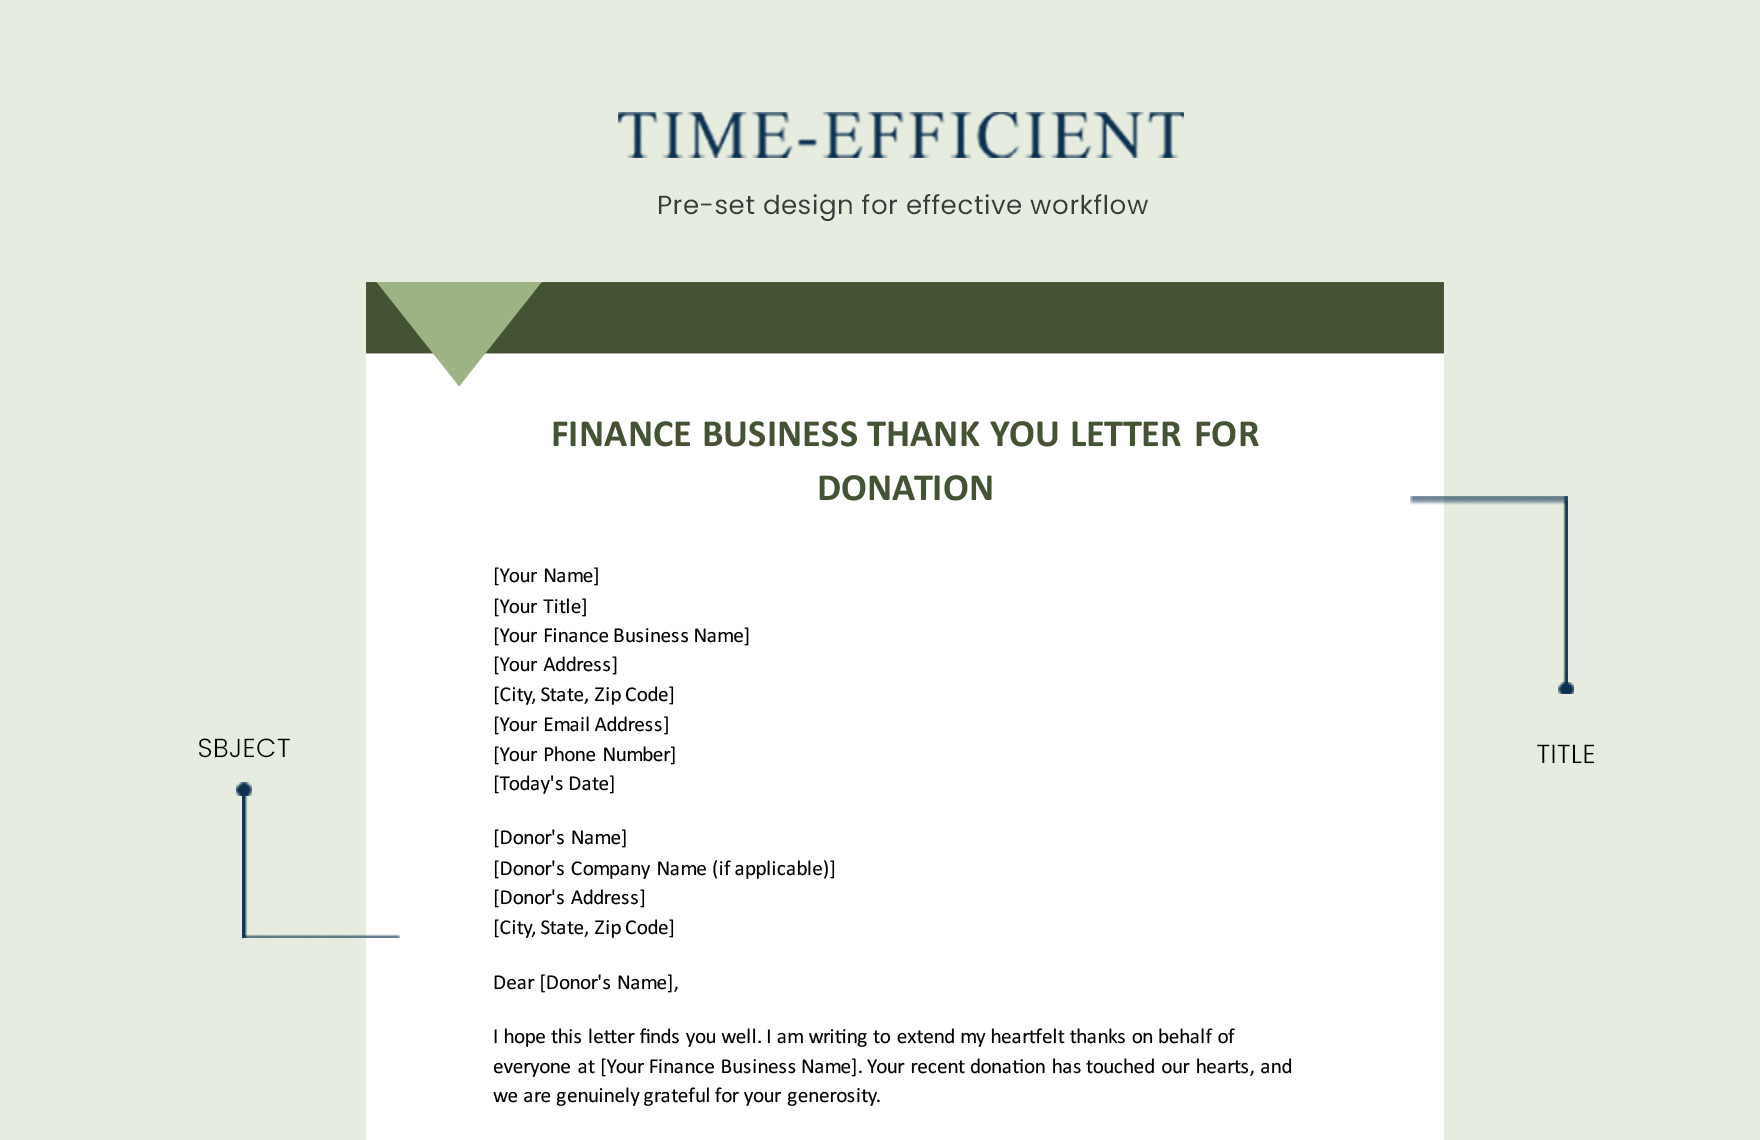 Finance Business Thank You Letter for Donation Template